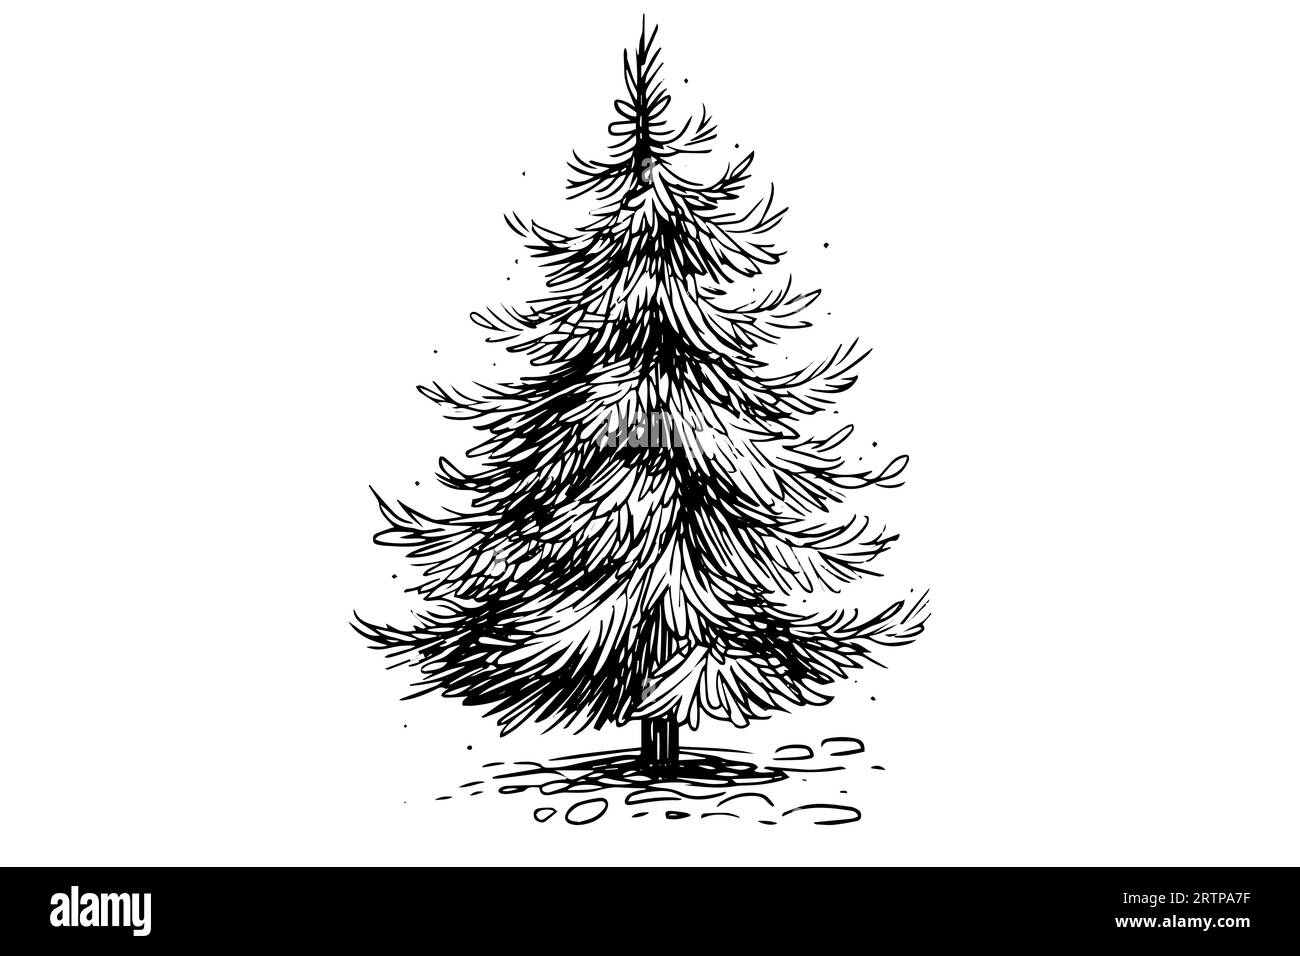 Christmas tree vector illustration. Hand drawn ink sketch. Engraving style image. Stock Vector